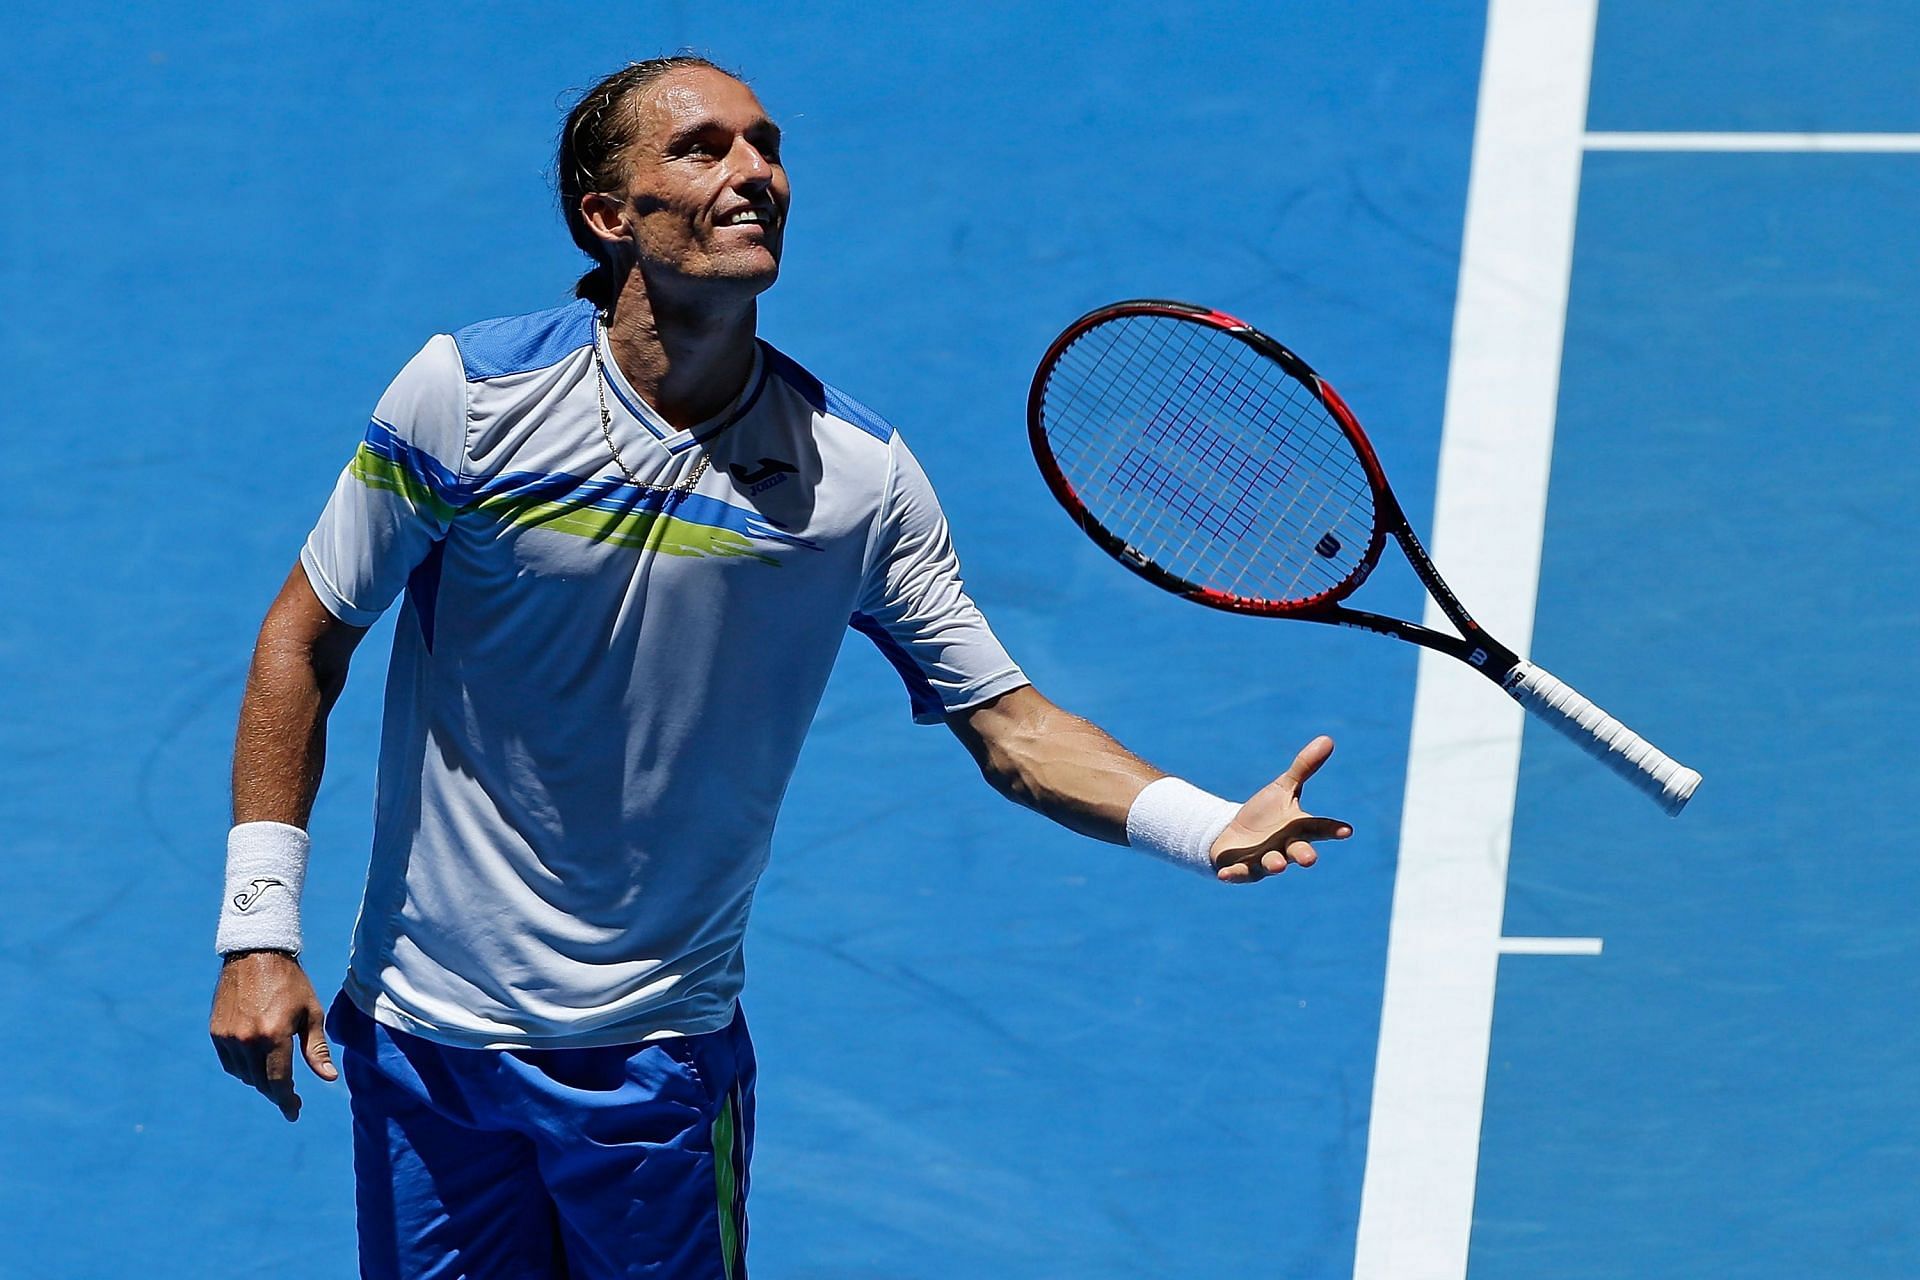 Alexandr Dolgopolov revealed his plans to stay back in Kiev even after the end of the war